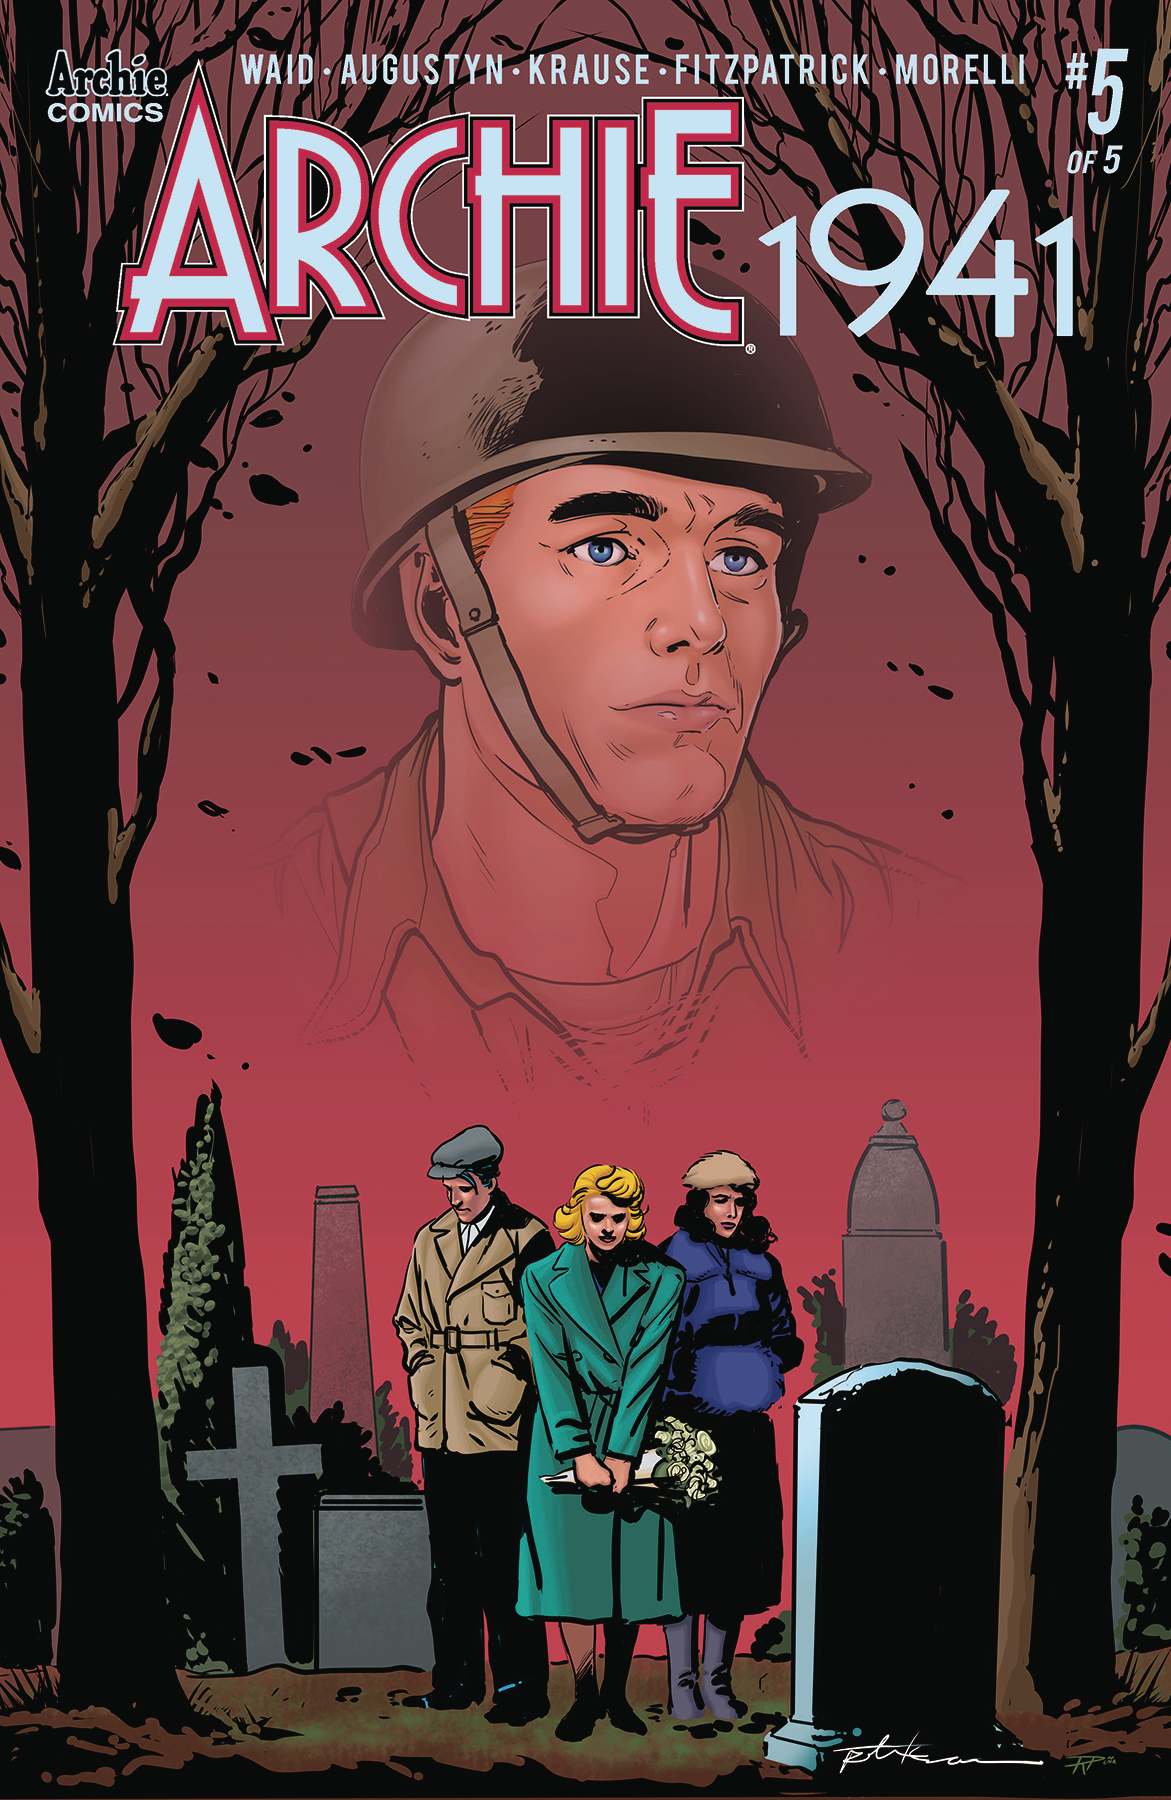 Archie 1941 no. 5 (5 of 5) (2018 Series)